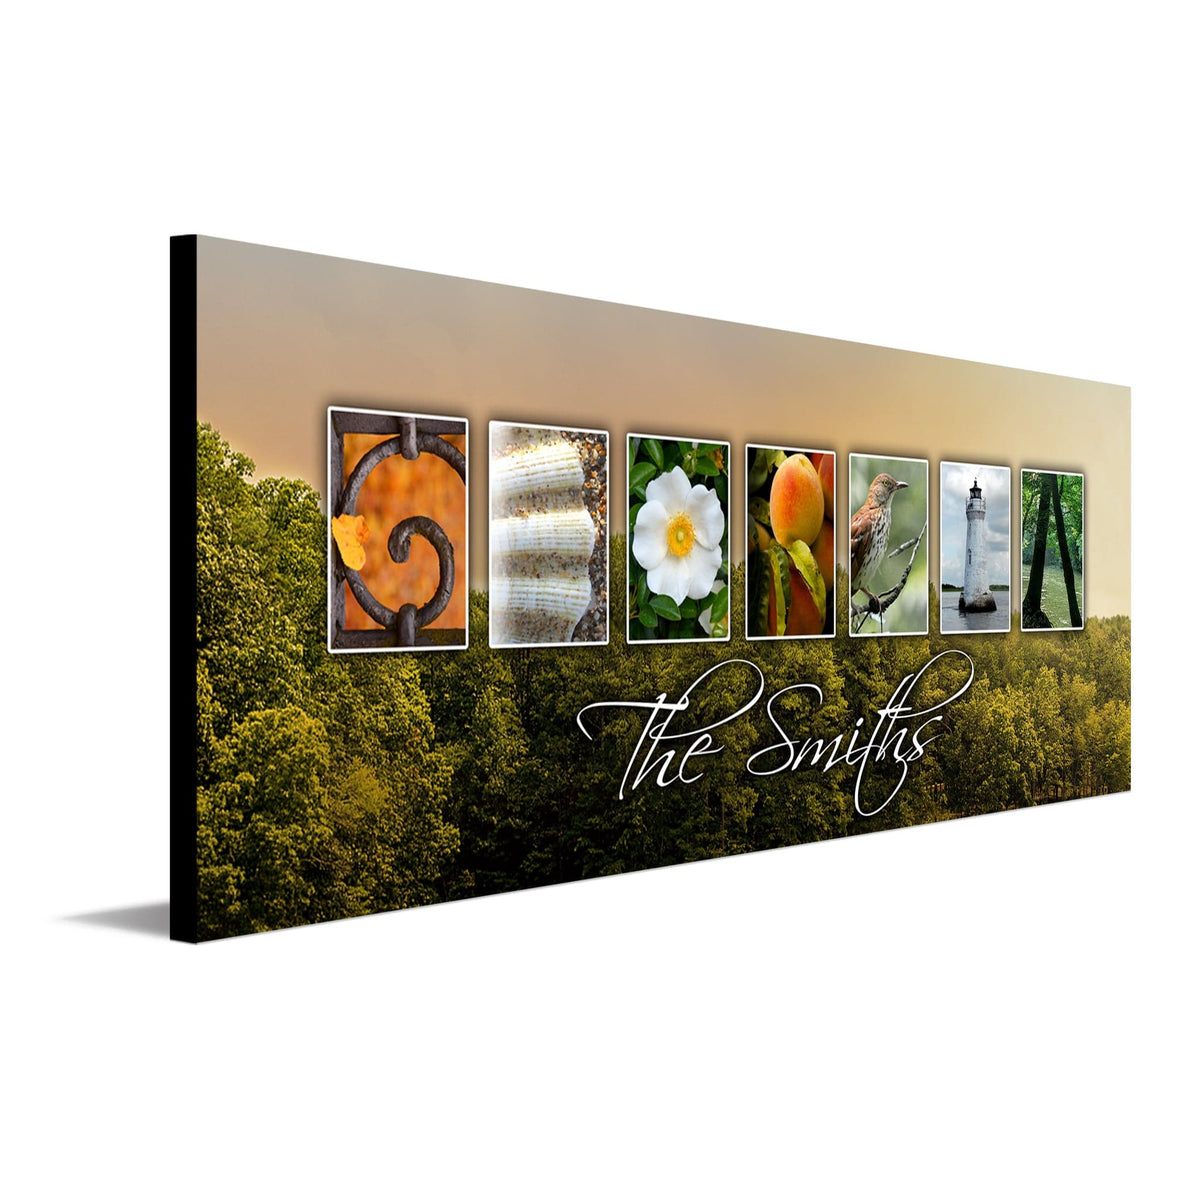 Personalized Georgia art that uses photographs from the state to spell the word Georgia - Personal-Prints